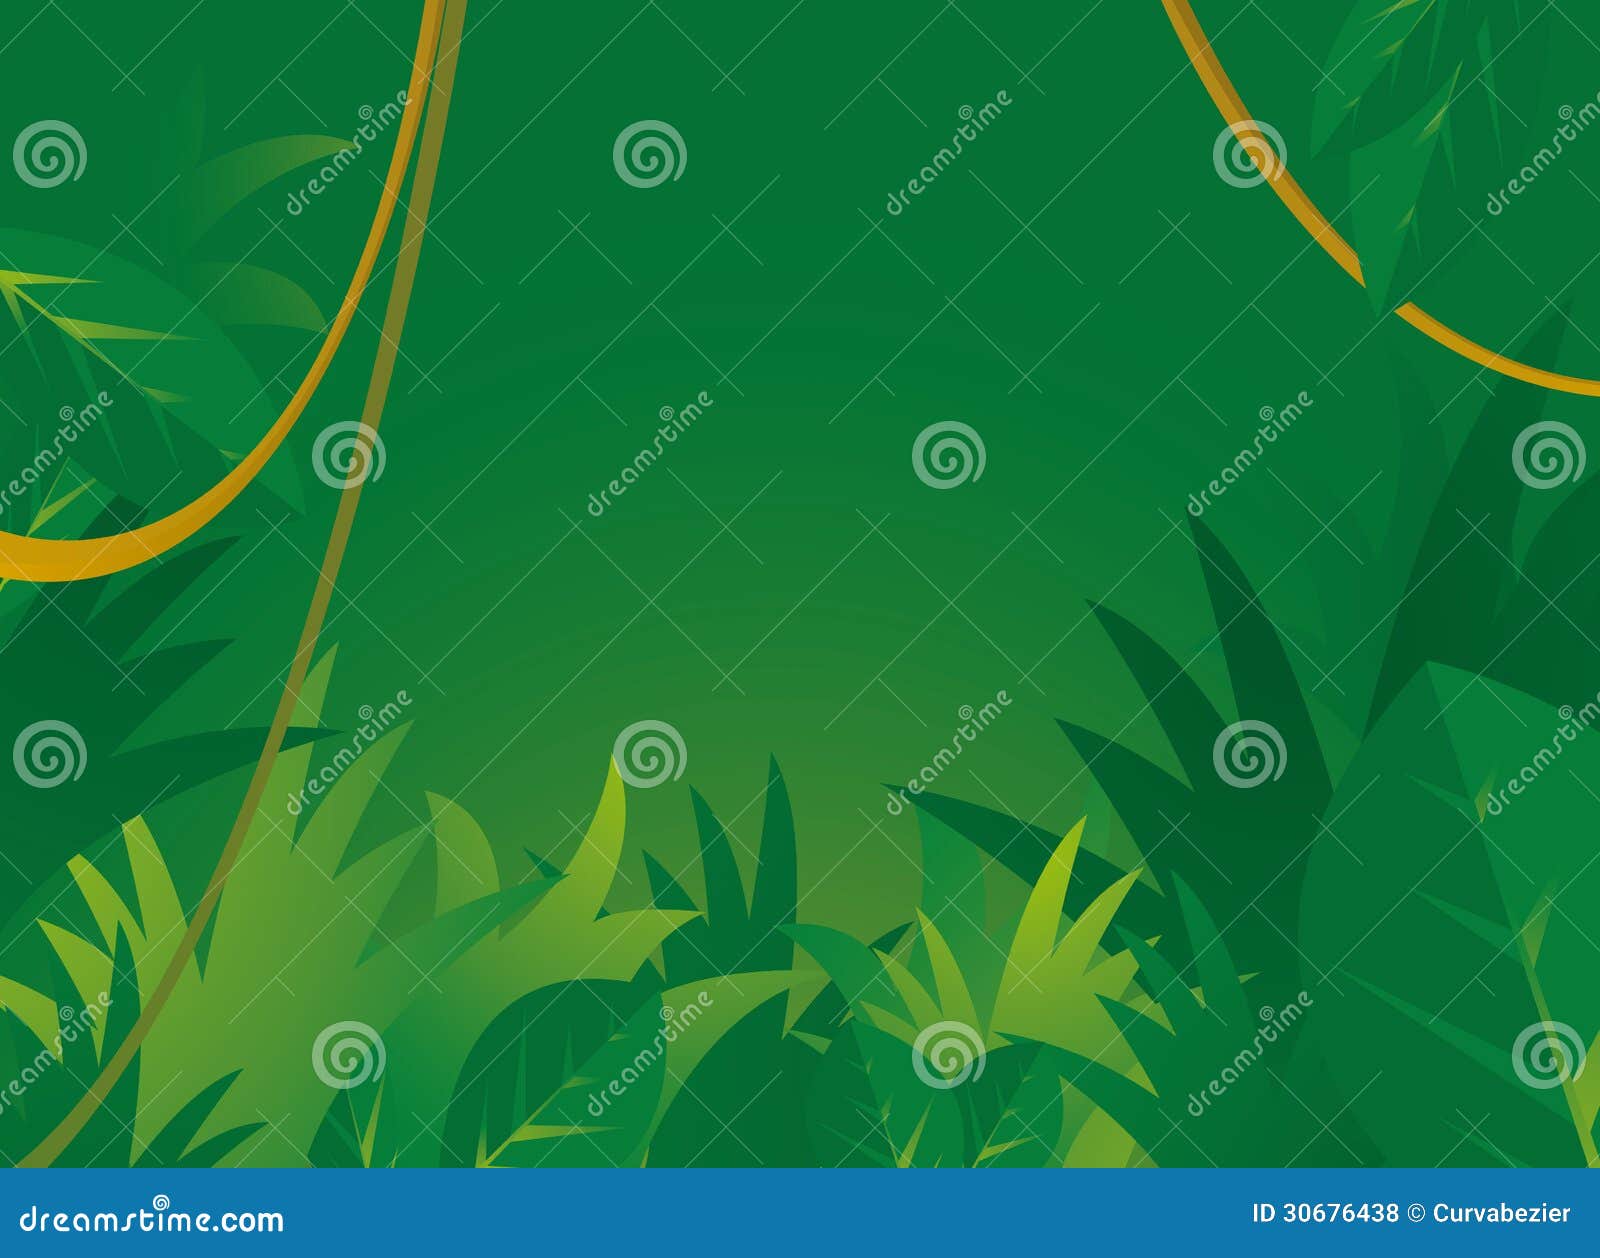 jungle background with copyspace